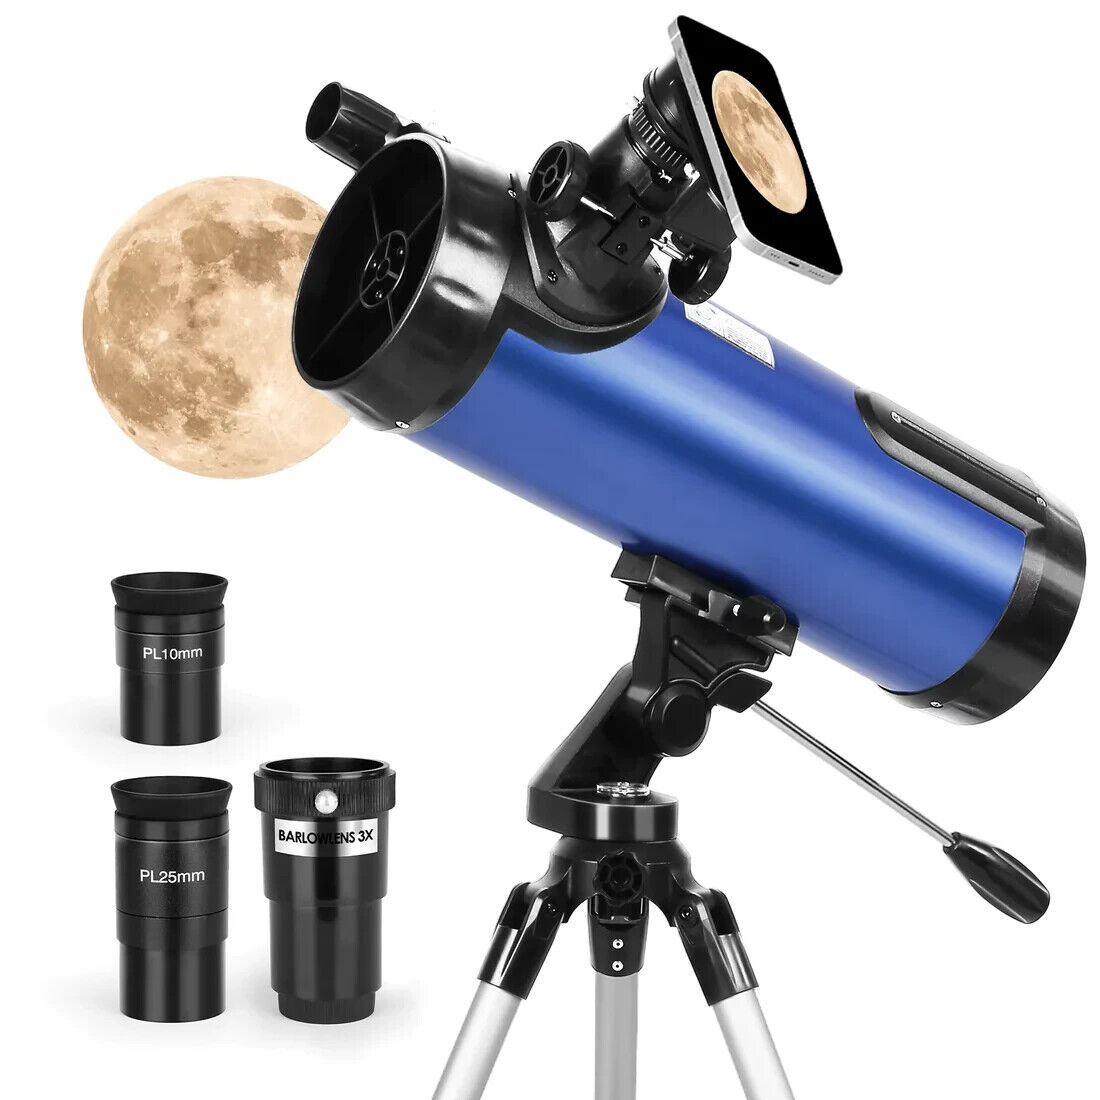 TELMU Telescope, Astronomical Reflector Adjustable Portable with Phone Adapter